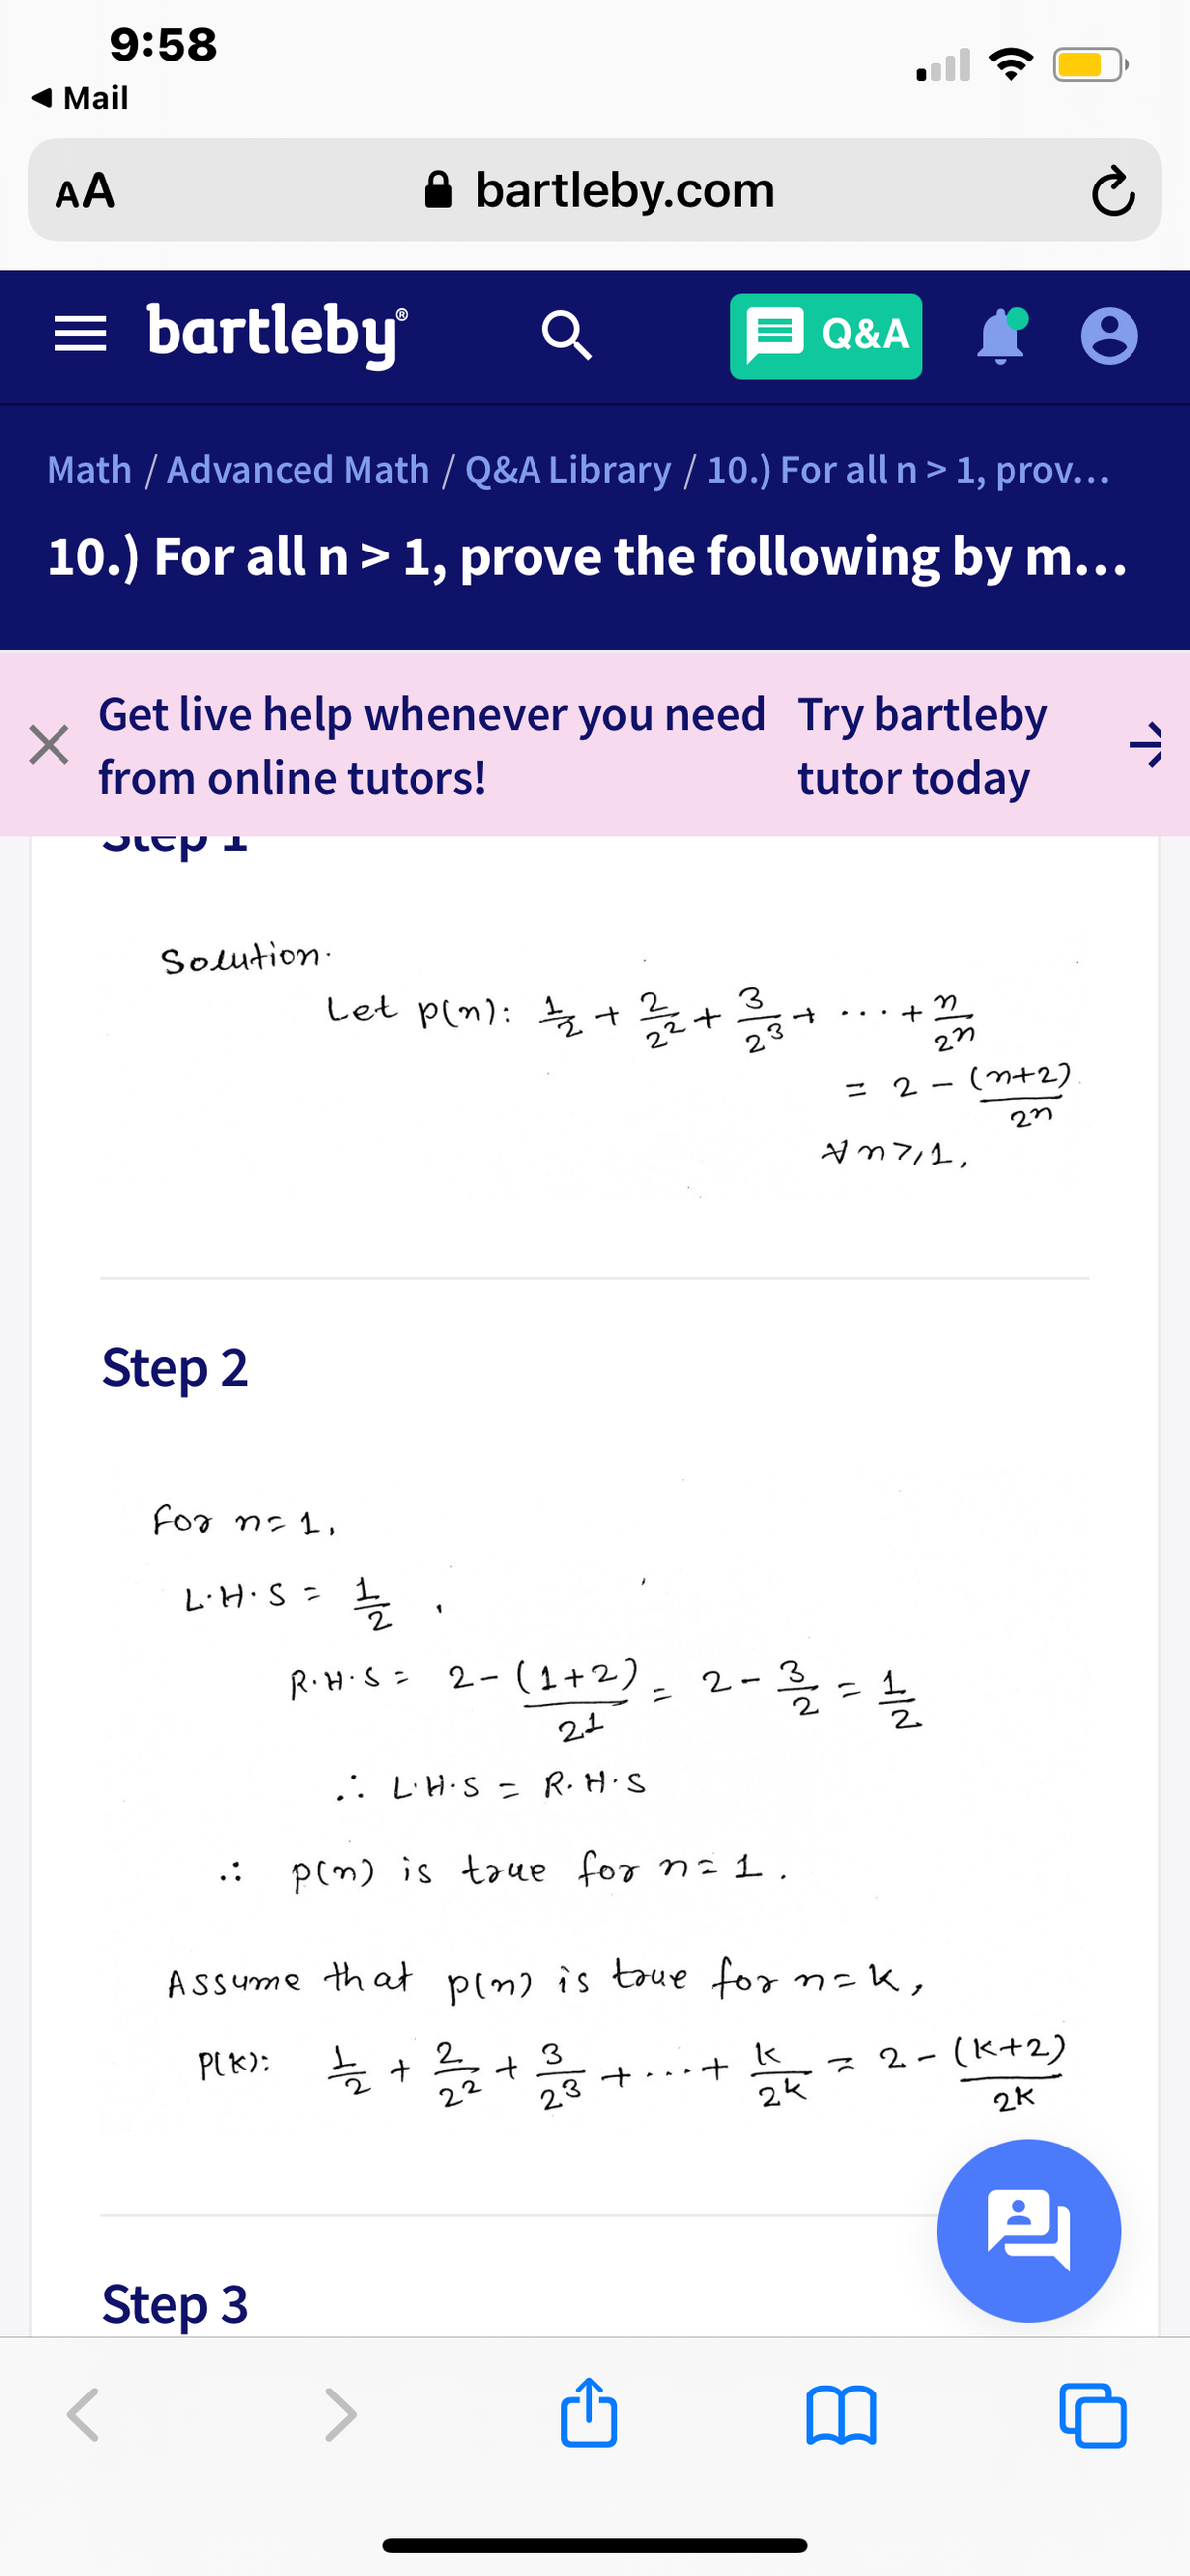 9:58
1 Mail
AA
A bartleby.com
= bartleby
E Q&A
Math / Advanced Math / Q&A Library / 10.) For all n > 1, prov...
10.) For all n> 1, prove the following by m...
Get live help whenever you need Try bartleby
from online tutors!
tutor today
Solution-
Let p(n): +
3
+
27
= 2 - (n+2)
Step 2
For n: 1,
L.H.S = 1
R.H.S- 2- ( 1 +2) _ 2-
ニ
.. L'H.S = R.H.S
p(m) is taue for n= 1.
ASsume that
P(m) is toue for n=K,
PIK):
늘 +
2.
3
2-(K+2)
ス
22
23 +
2K
四
Step 3
レ
